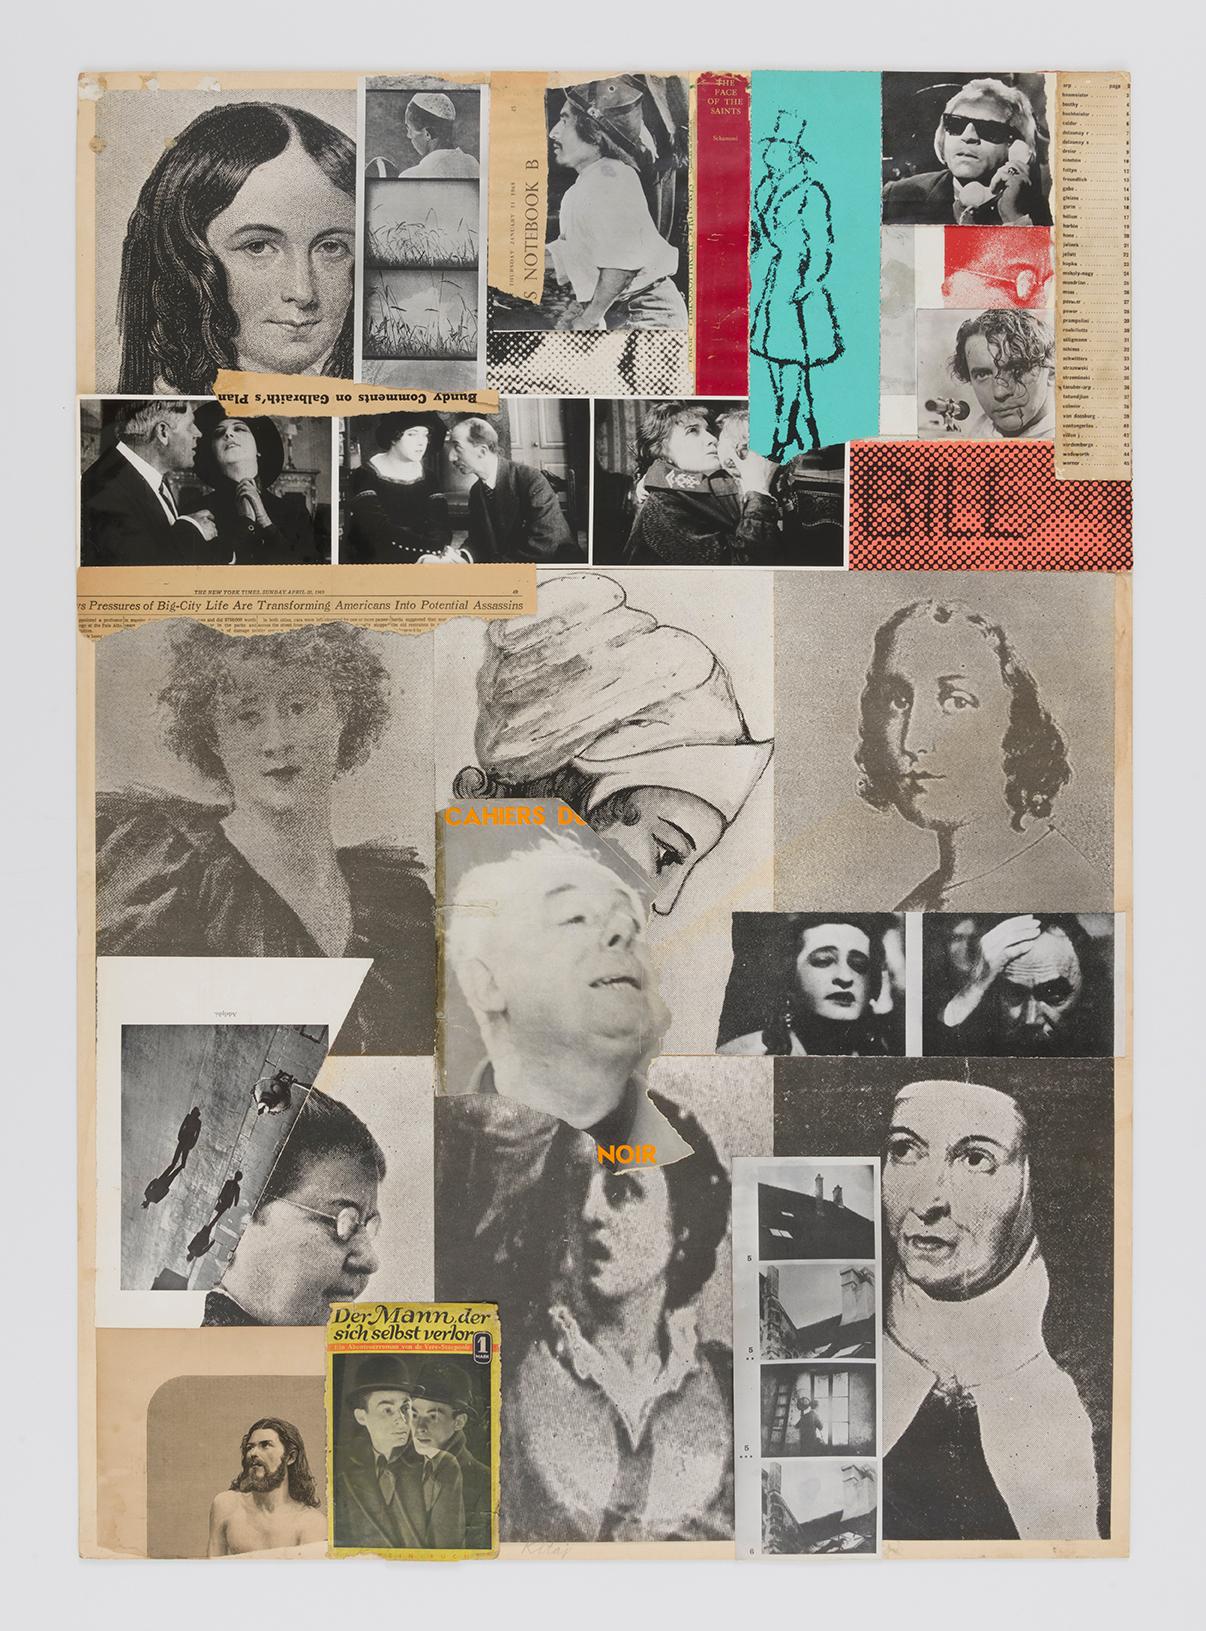 Opening reception: R.B. Kitaj "Collages and Prints, 1964-75"